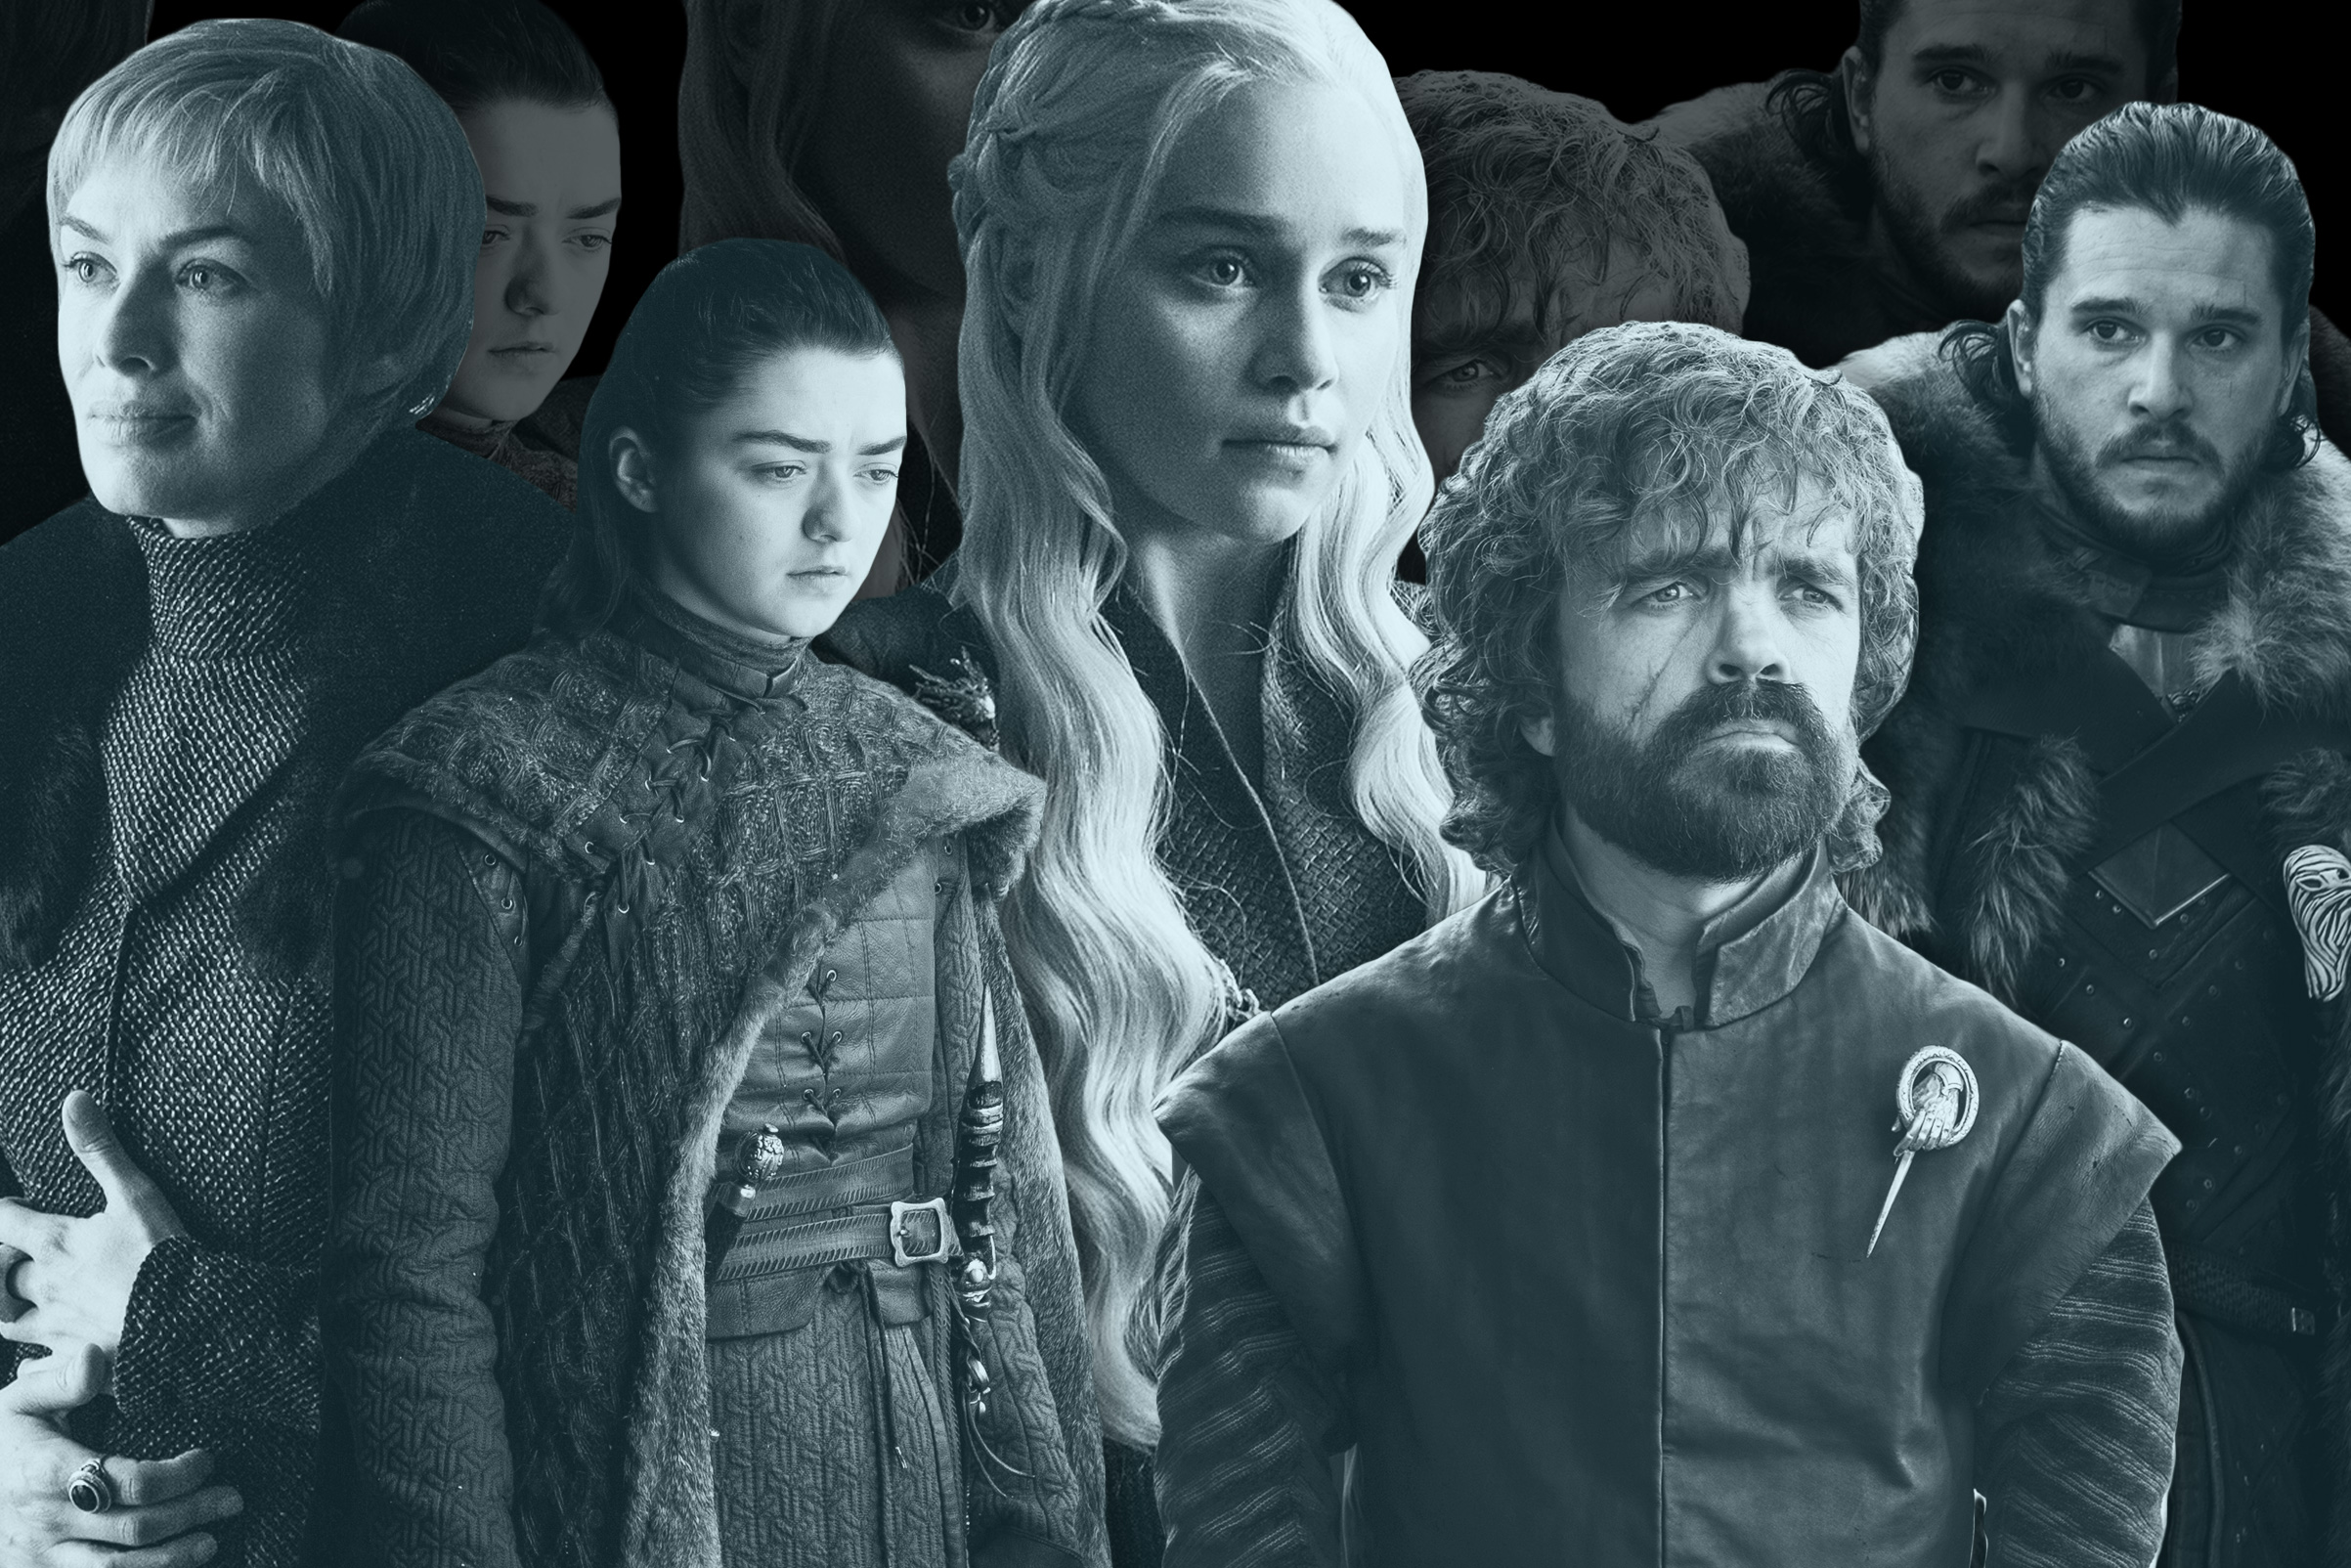 Game of Thrones reaches its end, with one or two shocks left